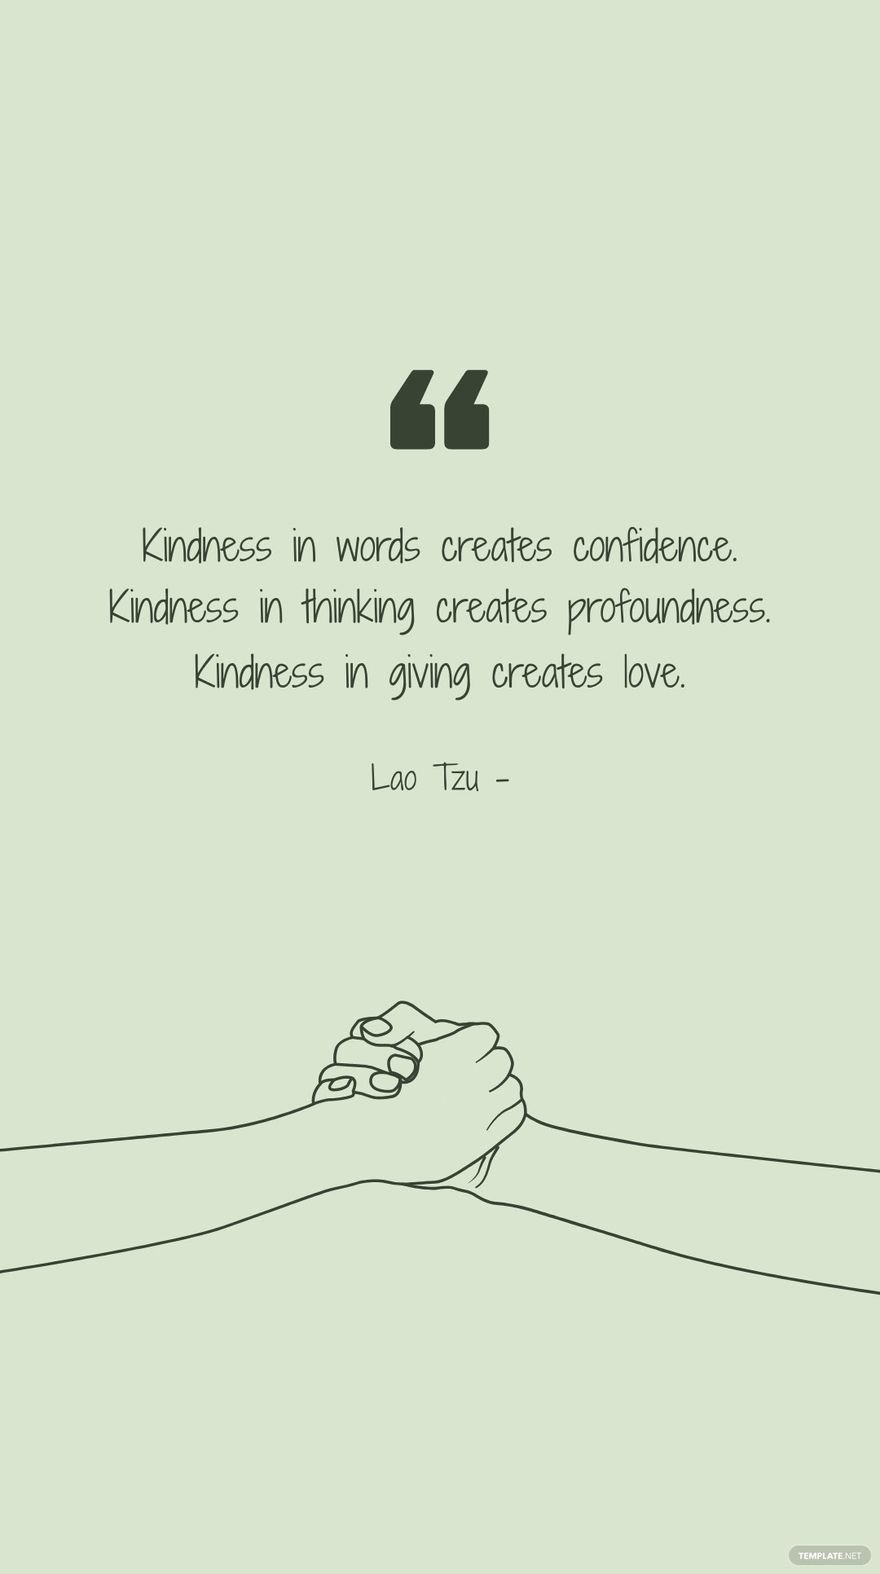 Lao Tzu - Kindness in words creates confidence. Kindness in thinking creates profoundness. Kindness in giving creates love.